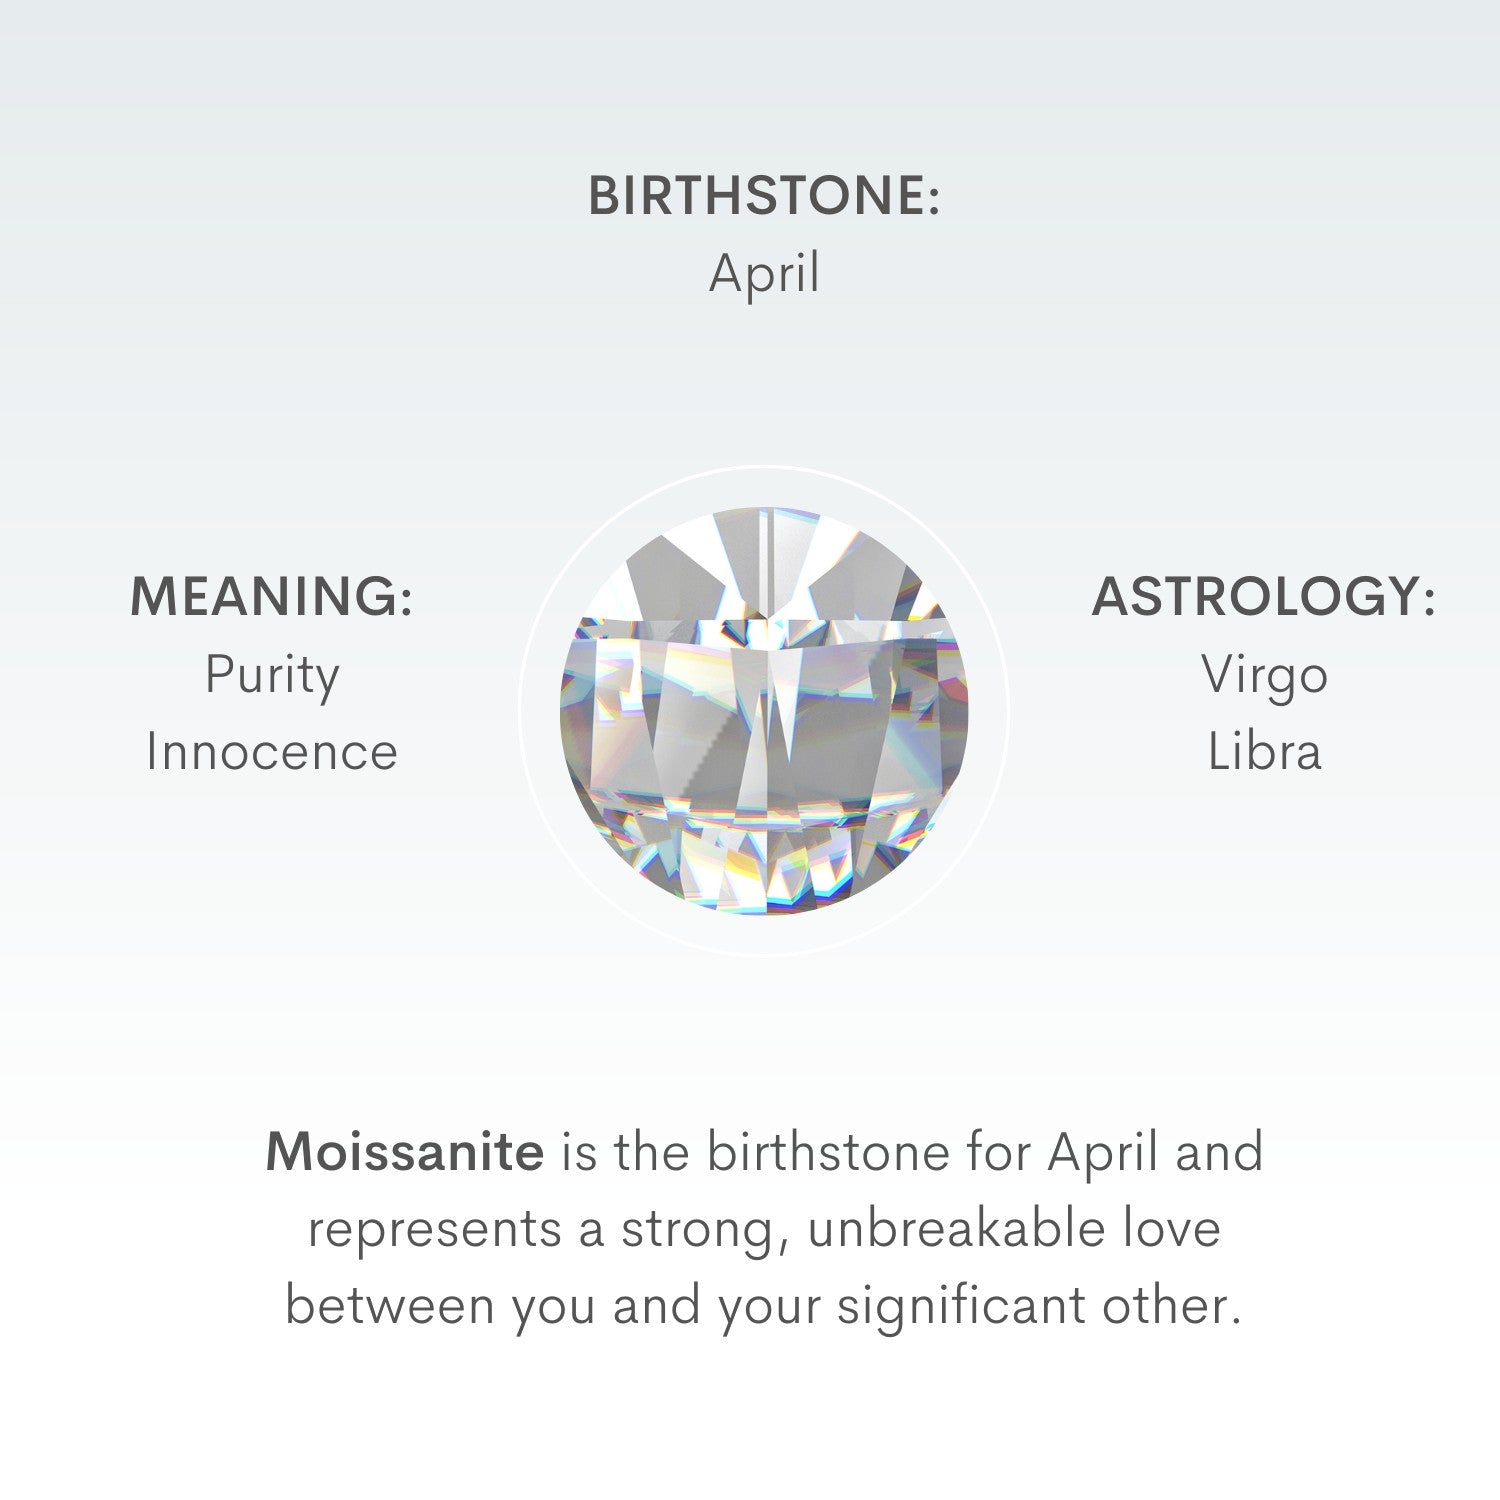 Moissanite is the birthstone for April and represents a strong,unbreakable love between you and your significant other.